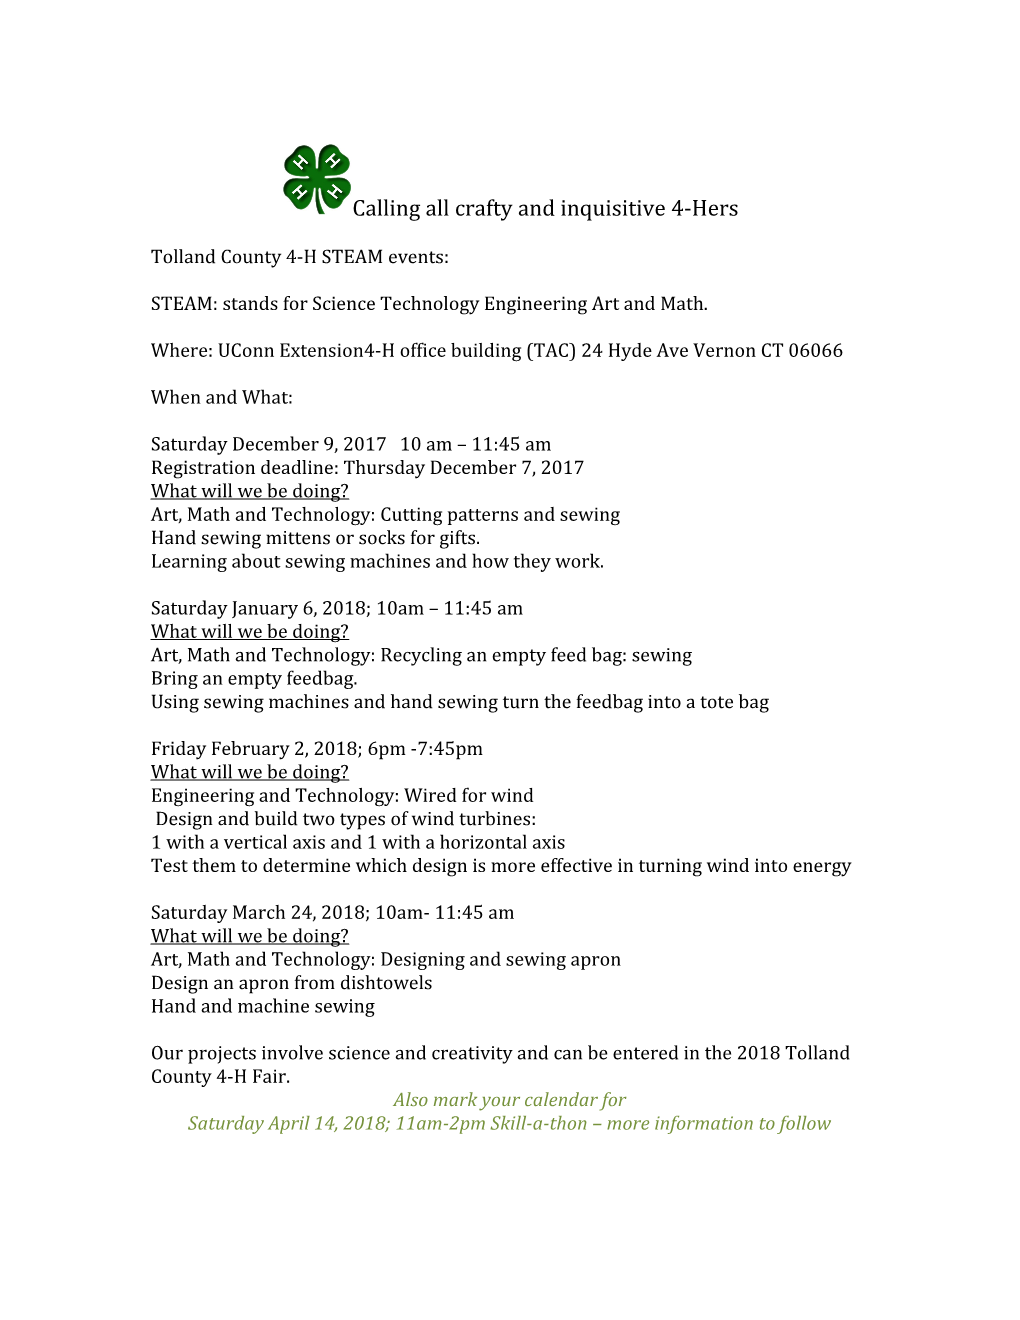 Tolland County 4-H STEAM Events